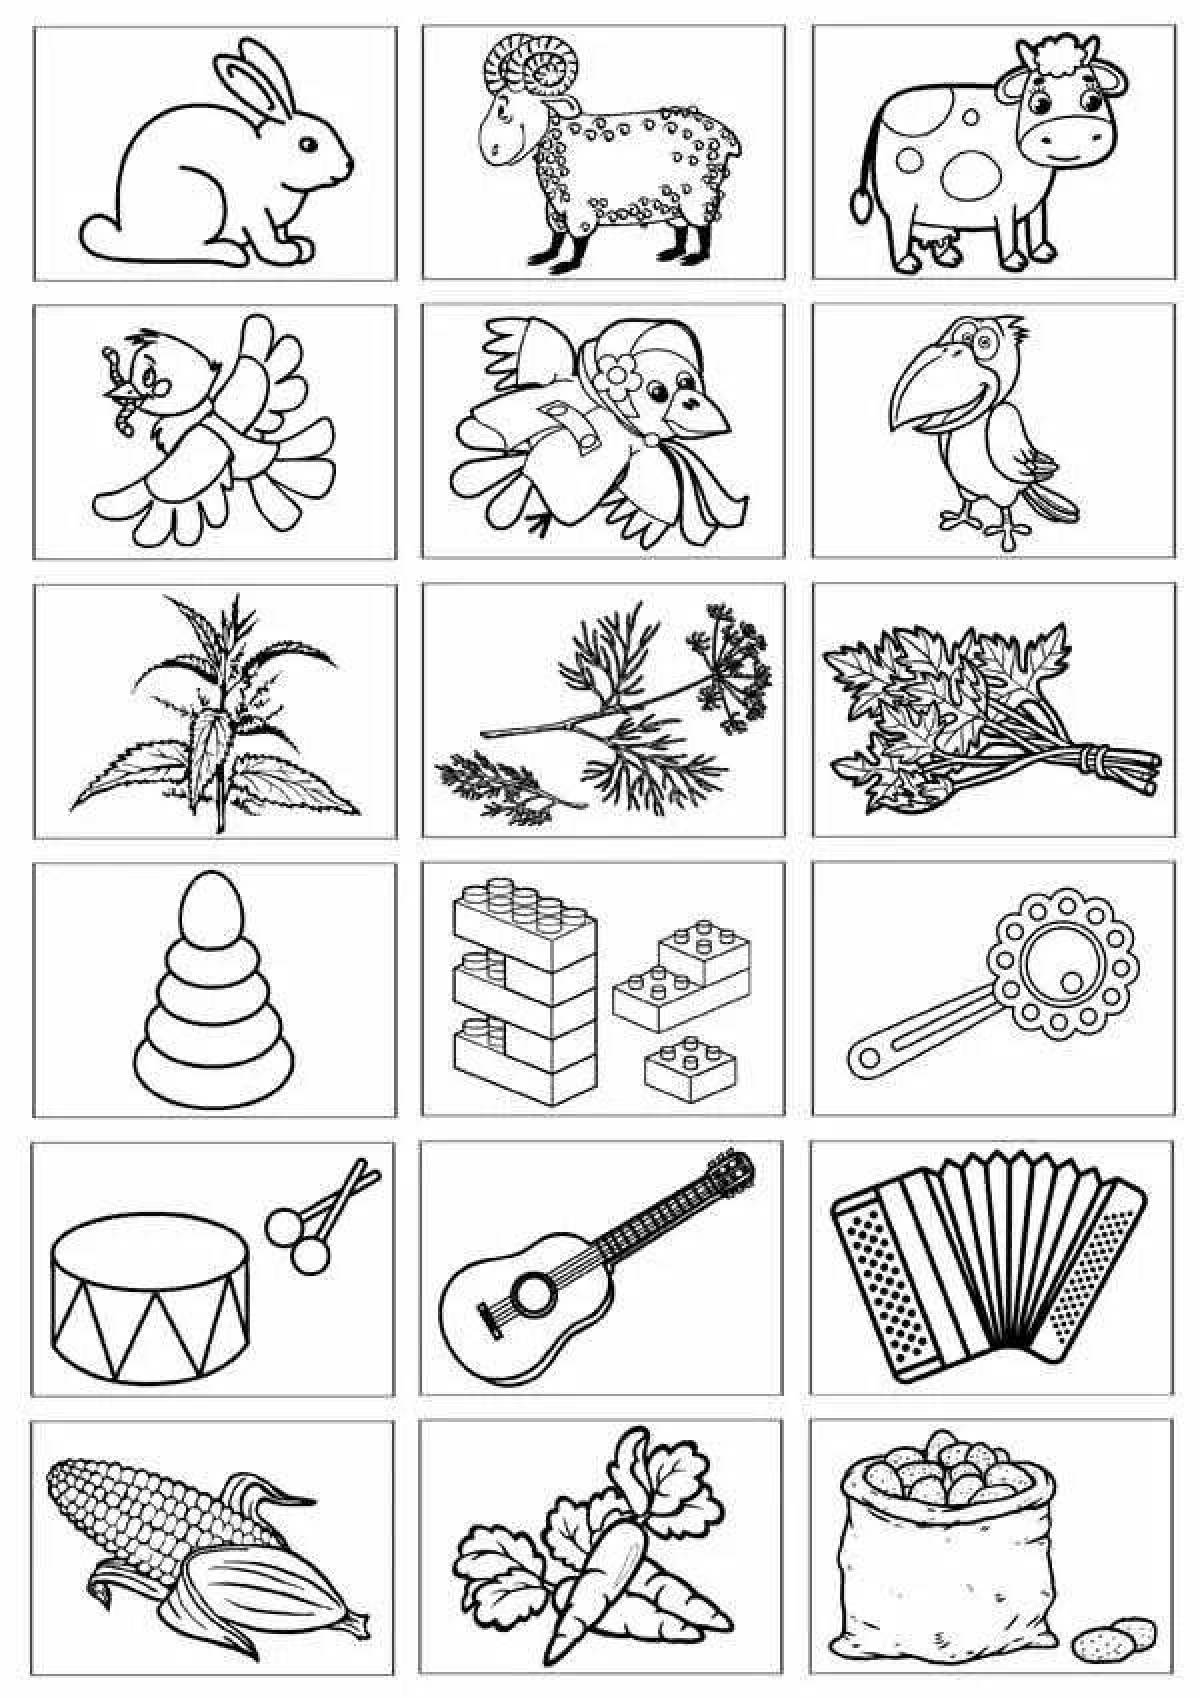 R-based vivid coloring for speech therapy